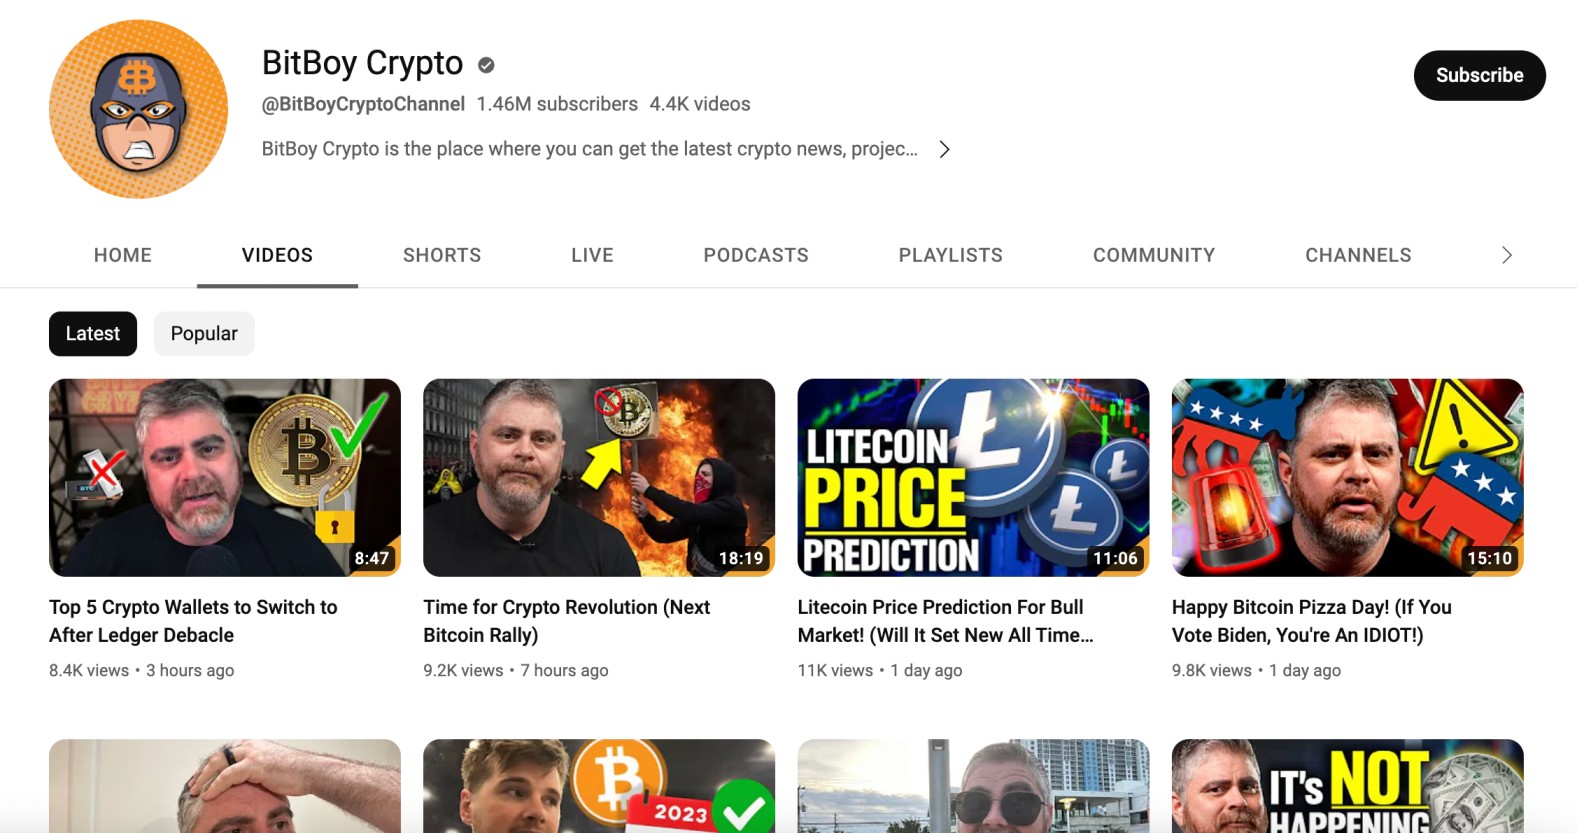 “Shill in sheep’s clothing”: Reddit users called three worst crypto YouTubers